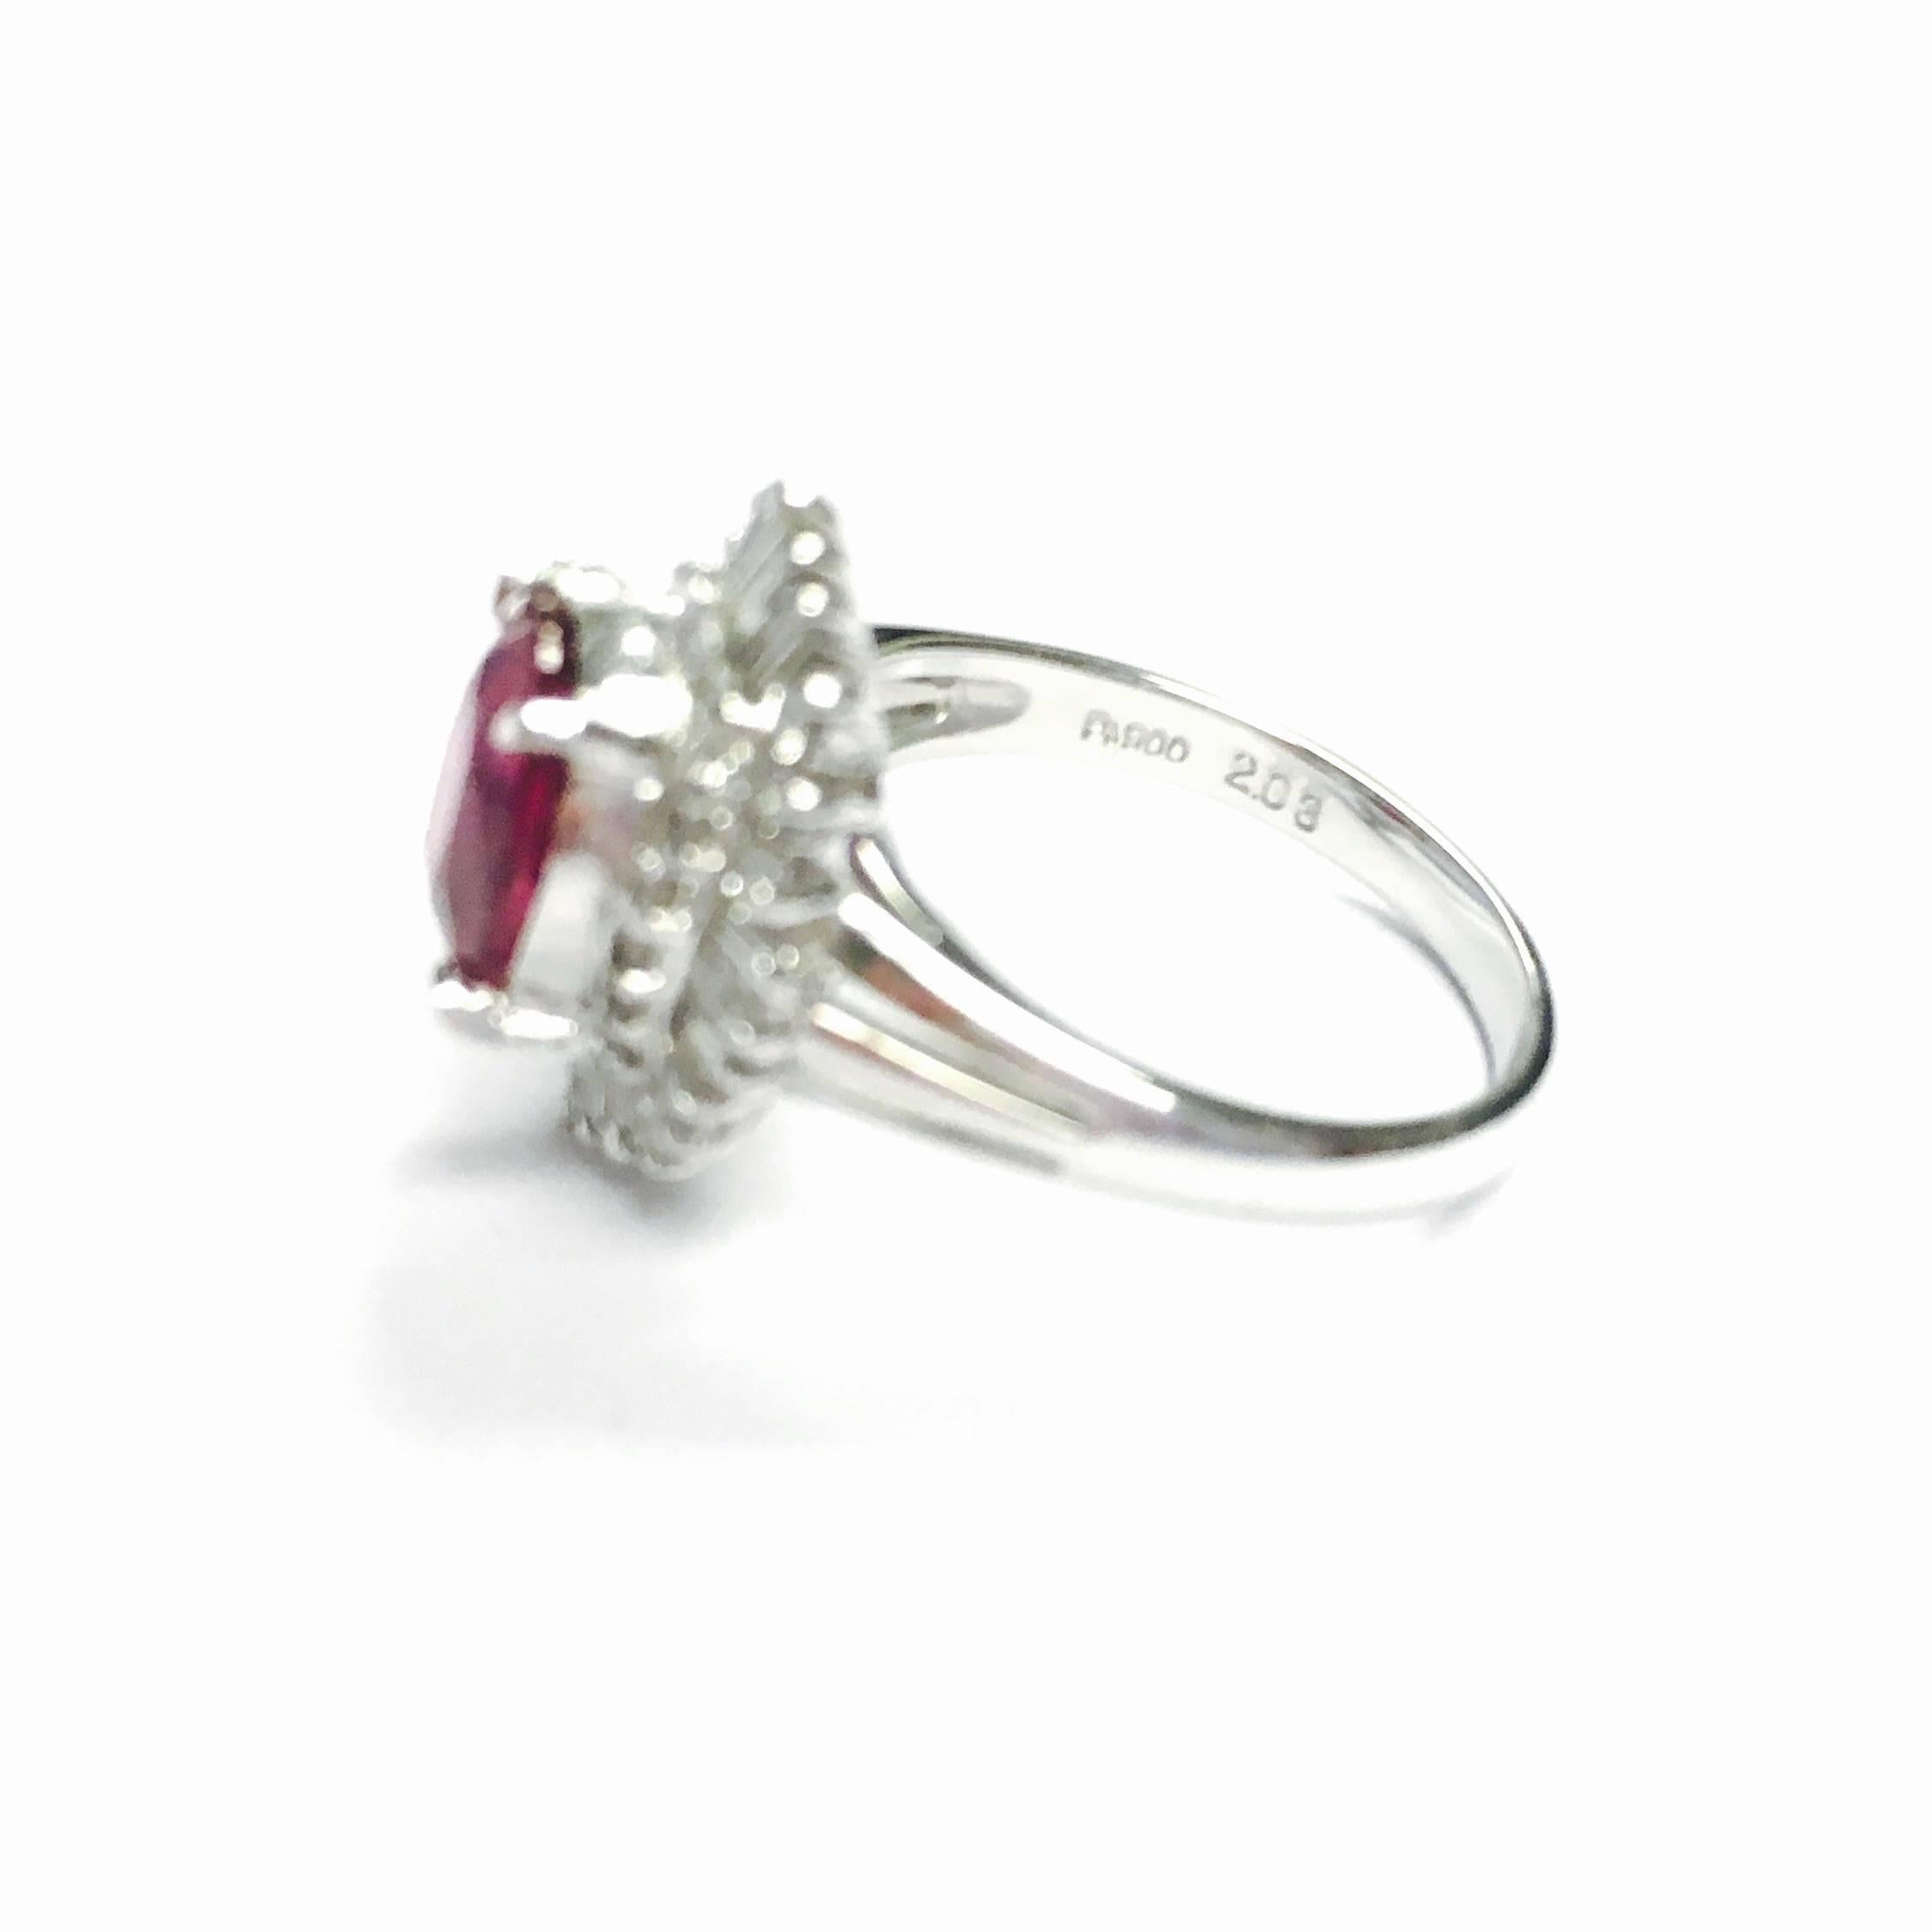 Featuring a 2.03ct oval cut no heat ruby solitaire, surrounded by a bezel of round brilliant and baguette cut diamonds, total weight: 0.50ct (stamped inside the shank). Color: F-G, Clarity: SI1-I1
Size: 6
Weight: 6.7 grams
GIA report number: